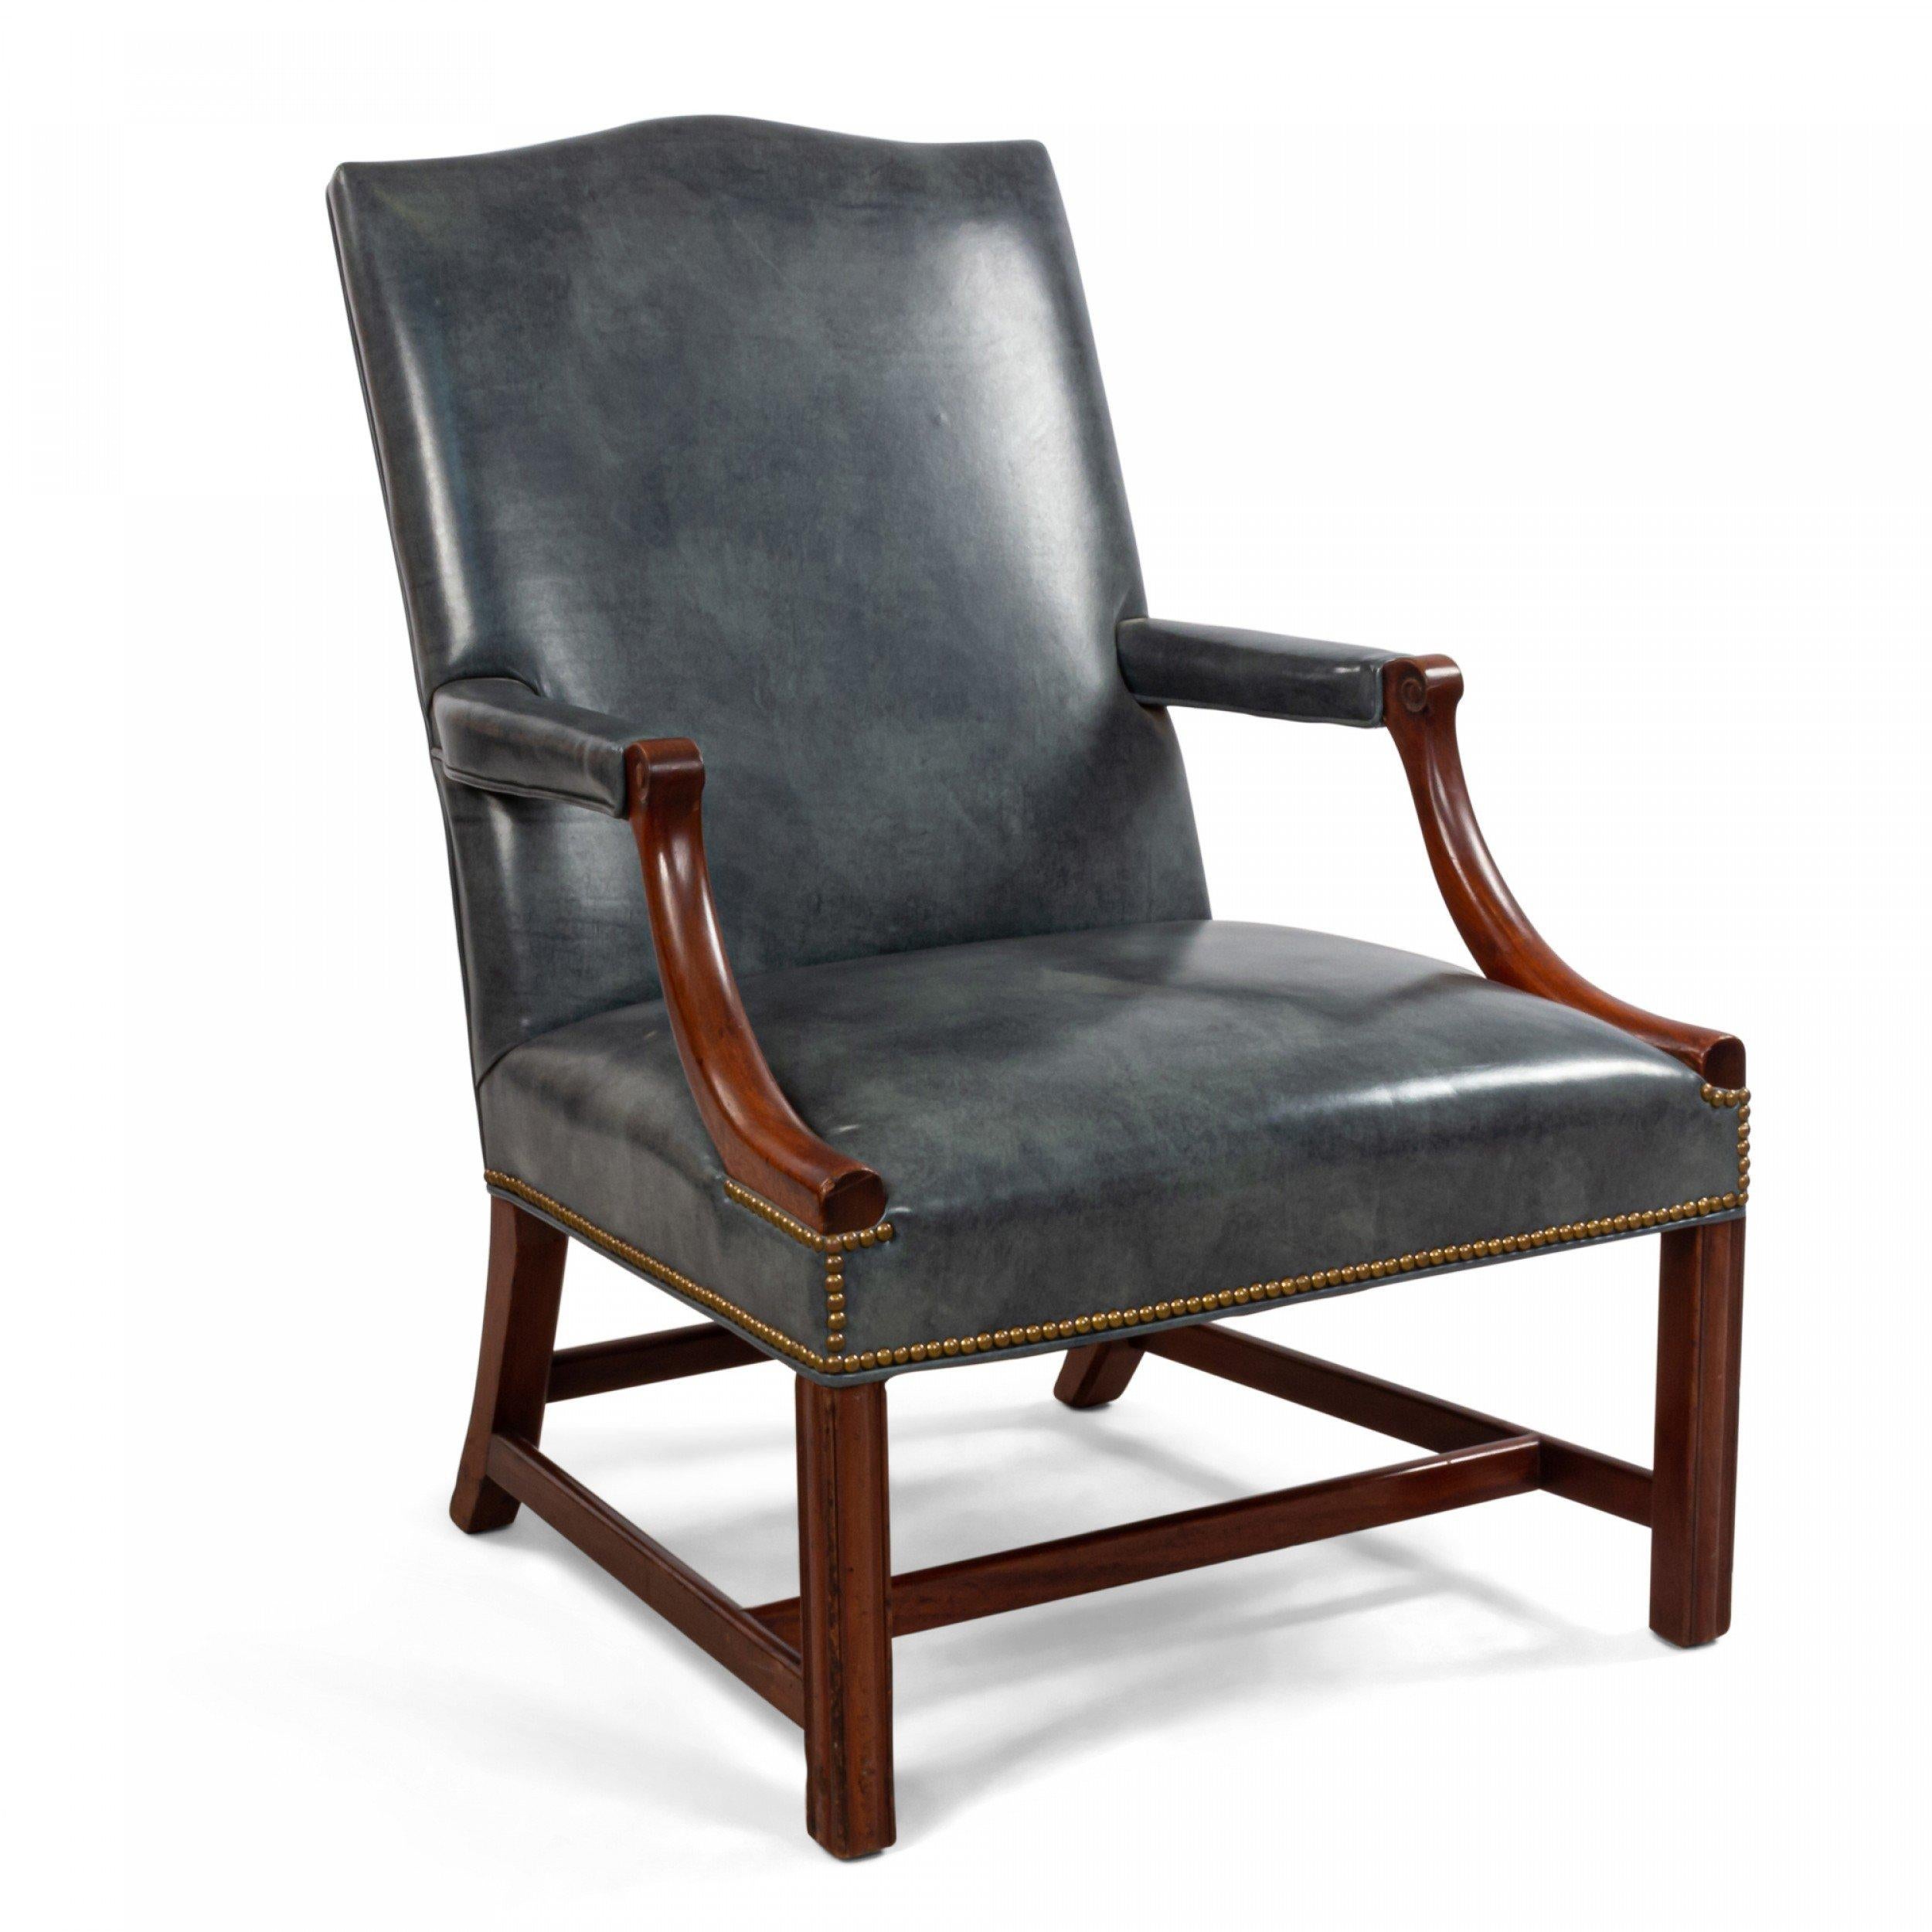 English Georgian style (20th Cent) mahogany open arm chair with shaped back and upholstered in a leather style blue/grey.
  